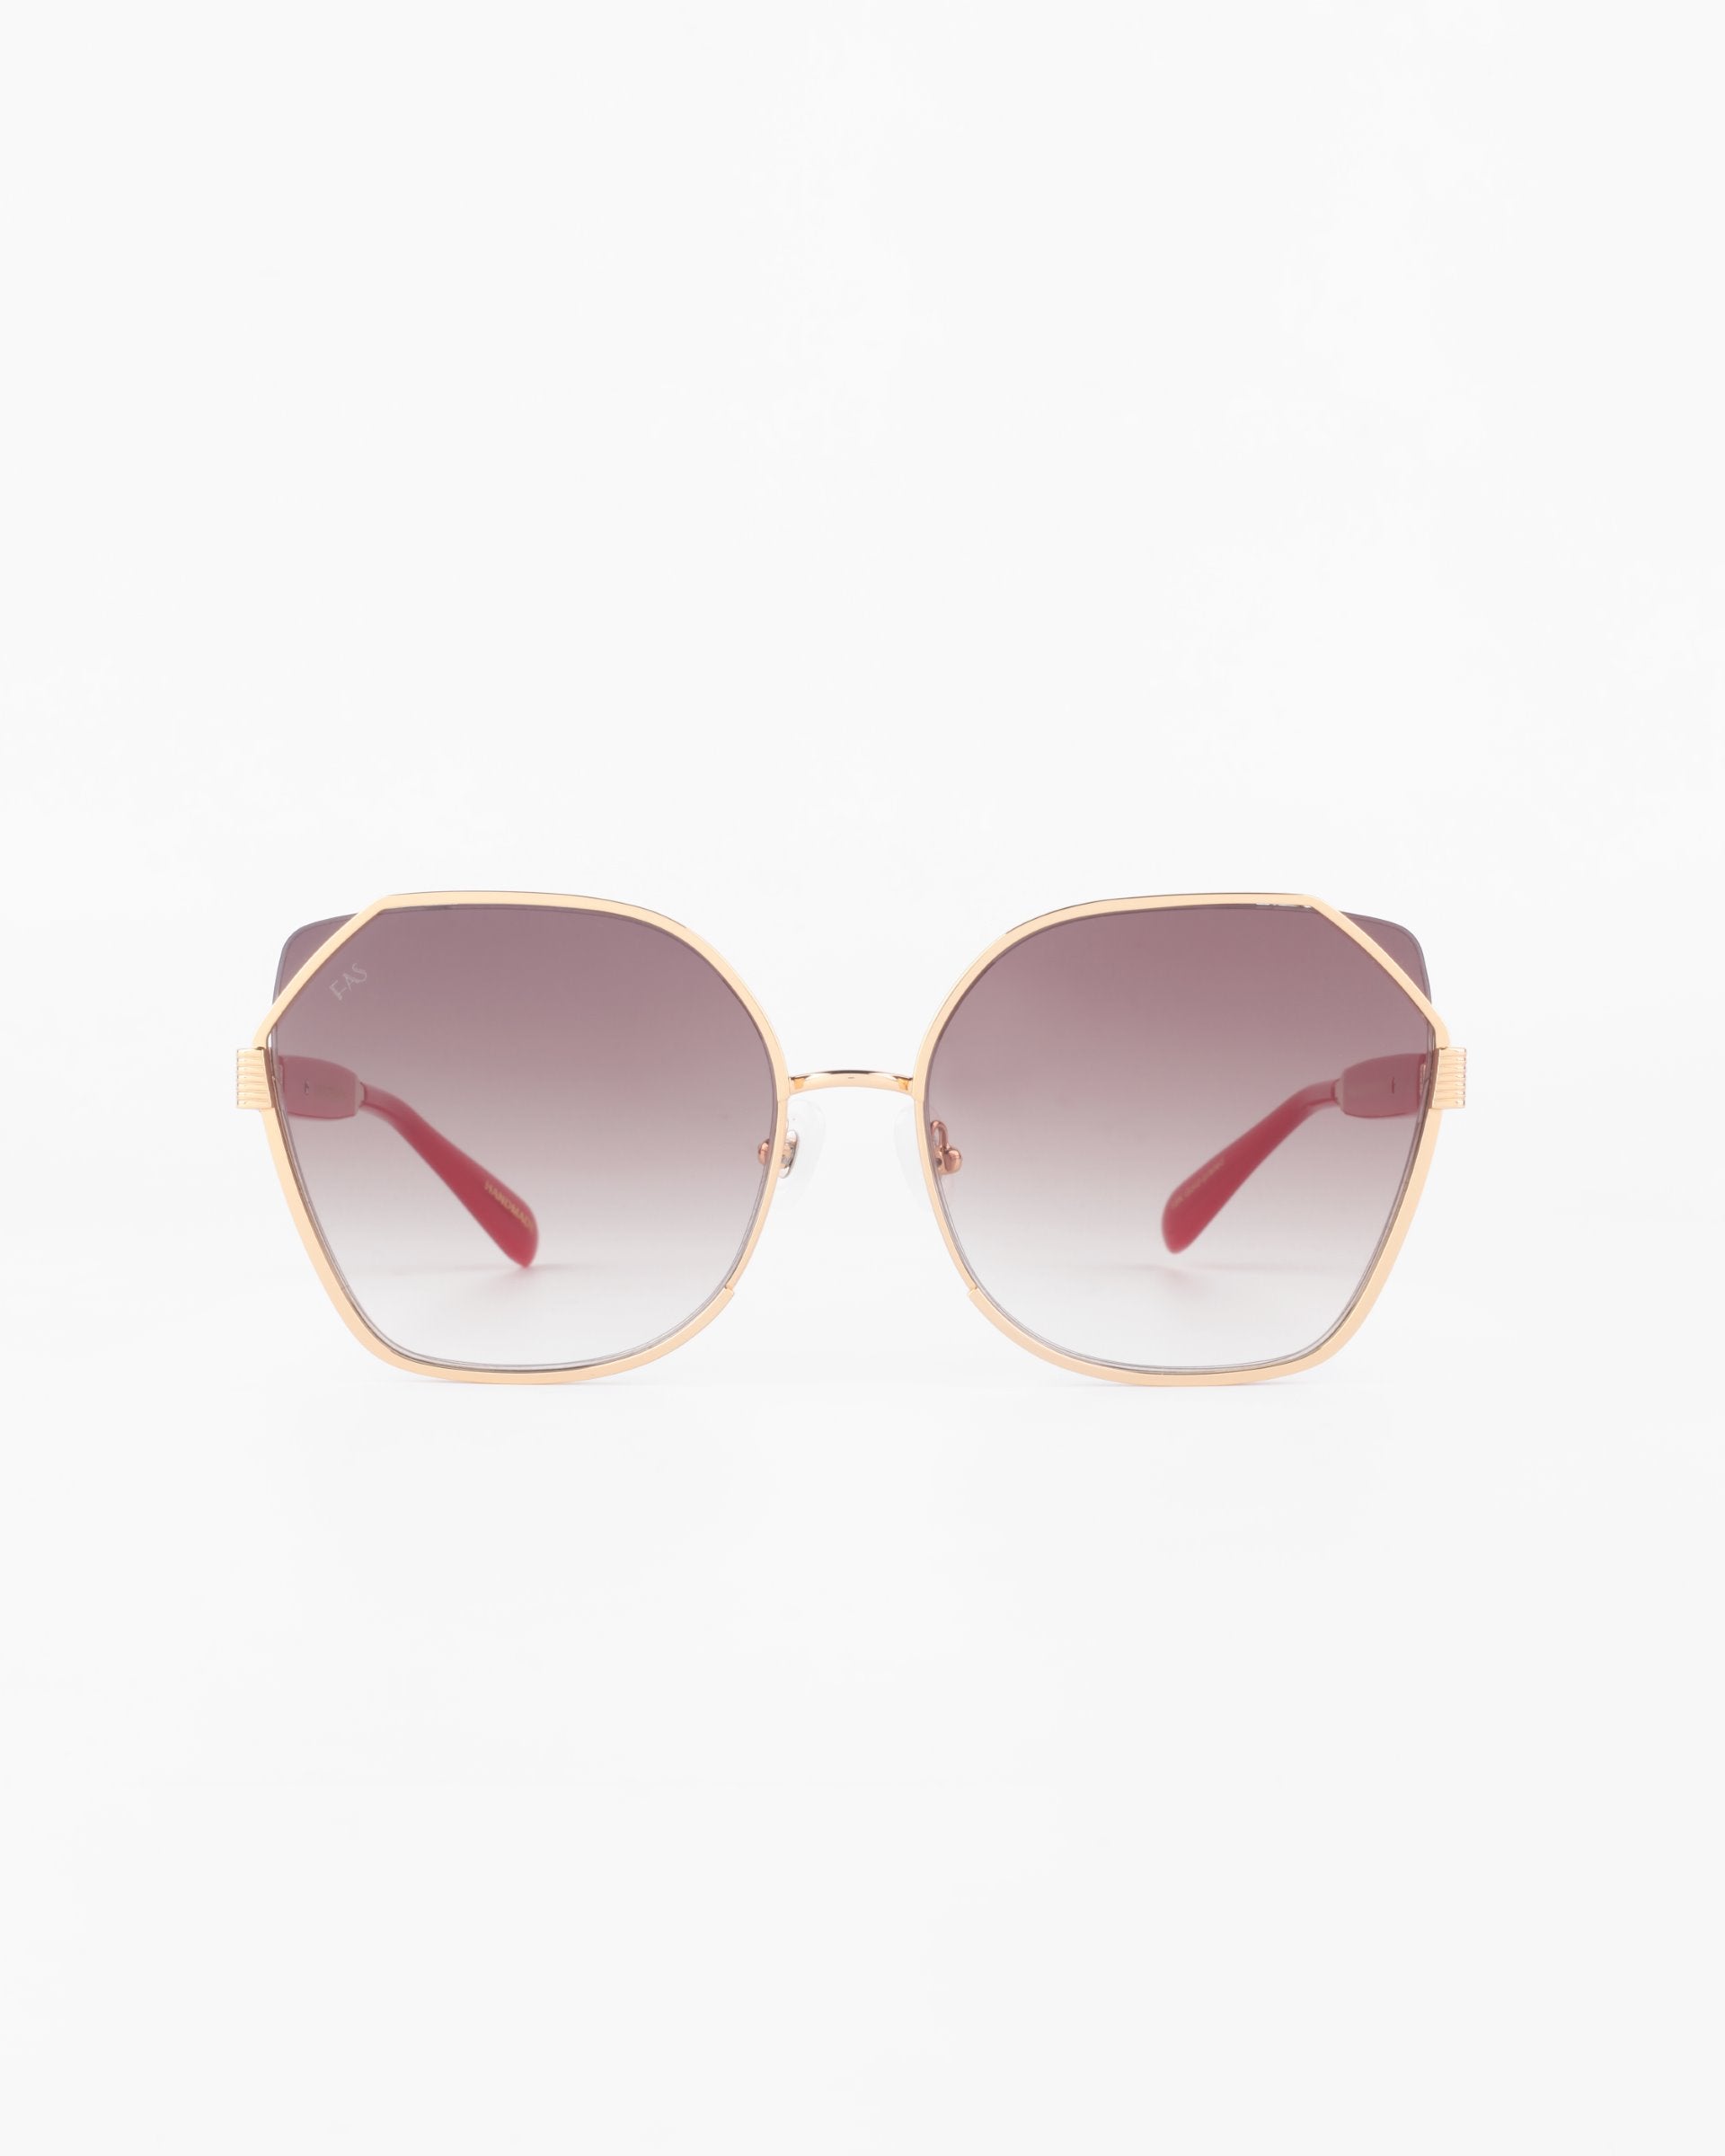 A pair of large, octagonal sunglasses with a gold-plated stainless steel frame and ultra-lightweight nylon lenses that transition from dark at the top to lighter at the bottom. The red-armed Montage by For Art's Sake® offer 100% UVA & UVB protection. The background is plain white.